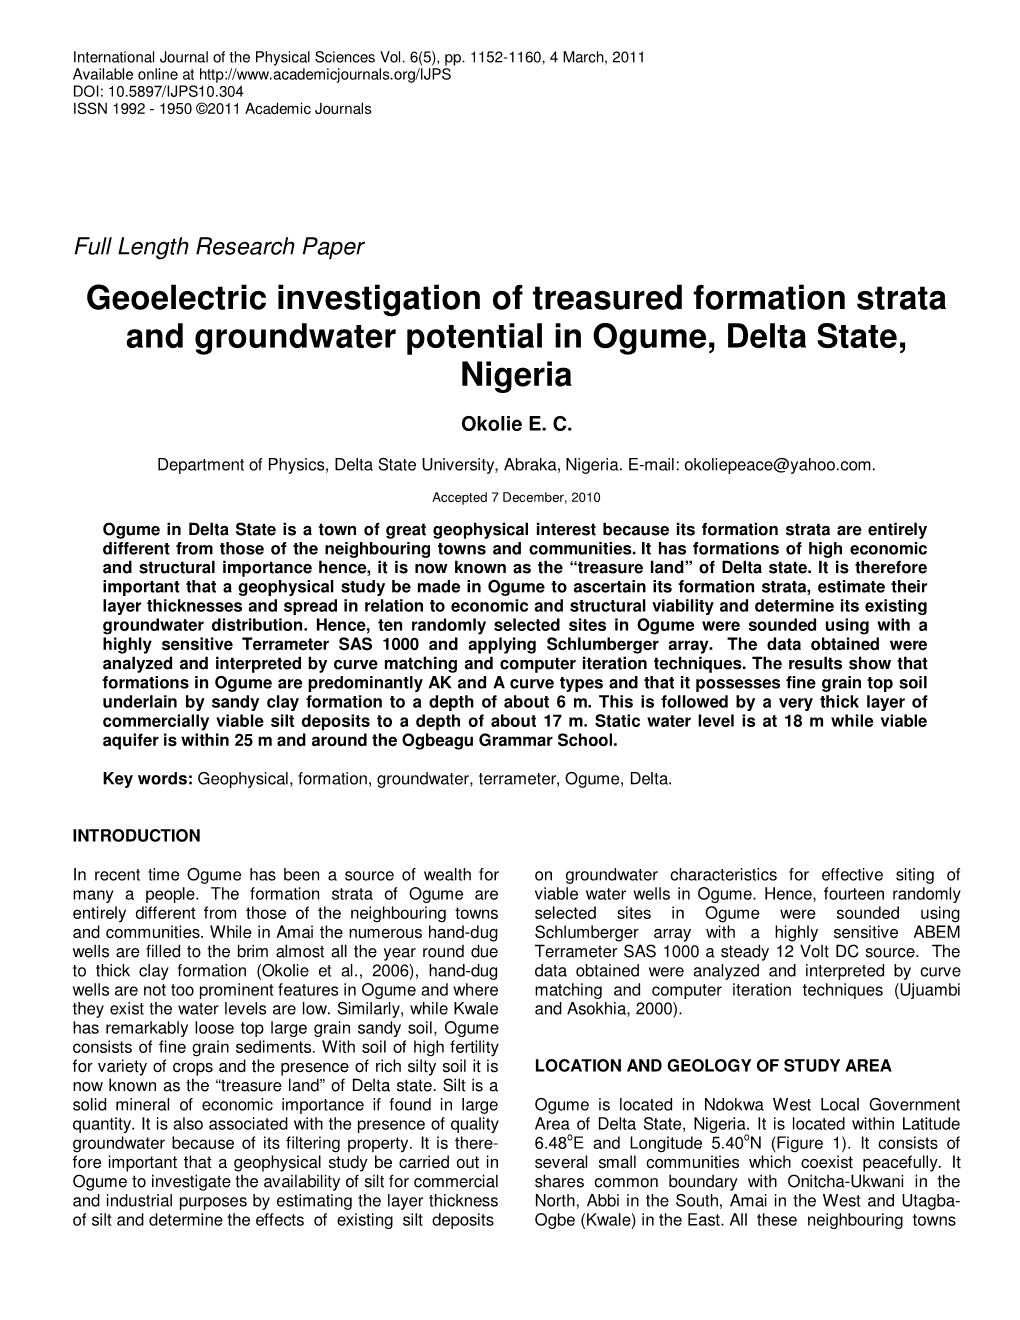 Geoelectric Investigation of Treasured Formation Strata and Groundwater Potential in Ogume, Delta State, Nigeria